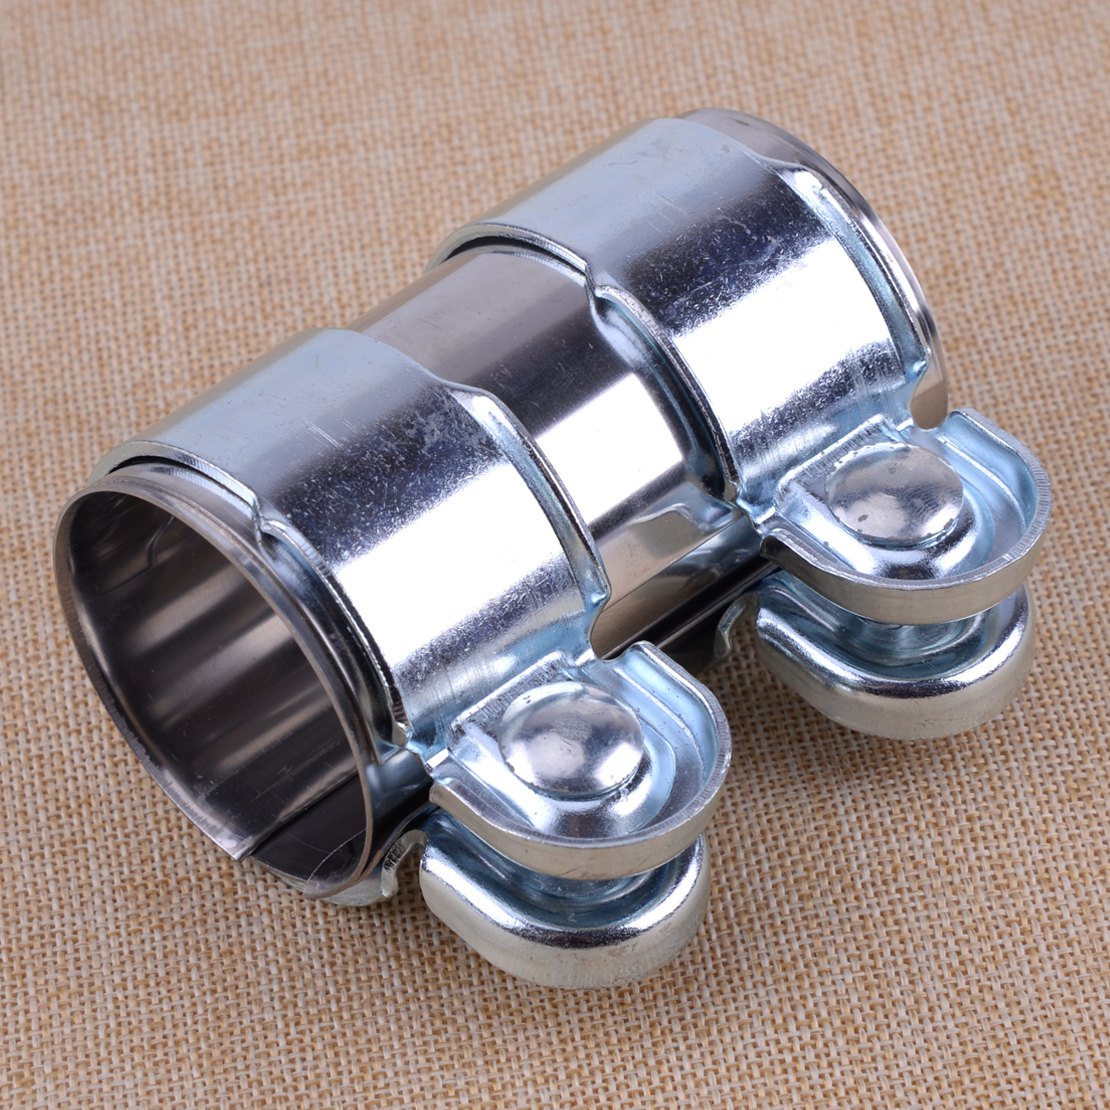 Universal Stainless Butt Joint Exhaust Clamp Sleeve Fit for 2" Exhaust